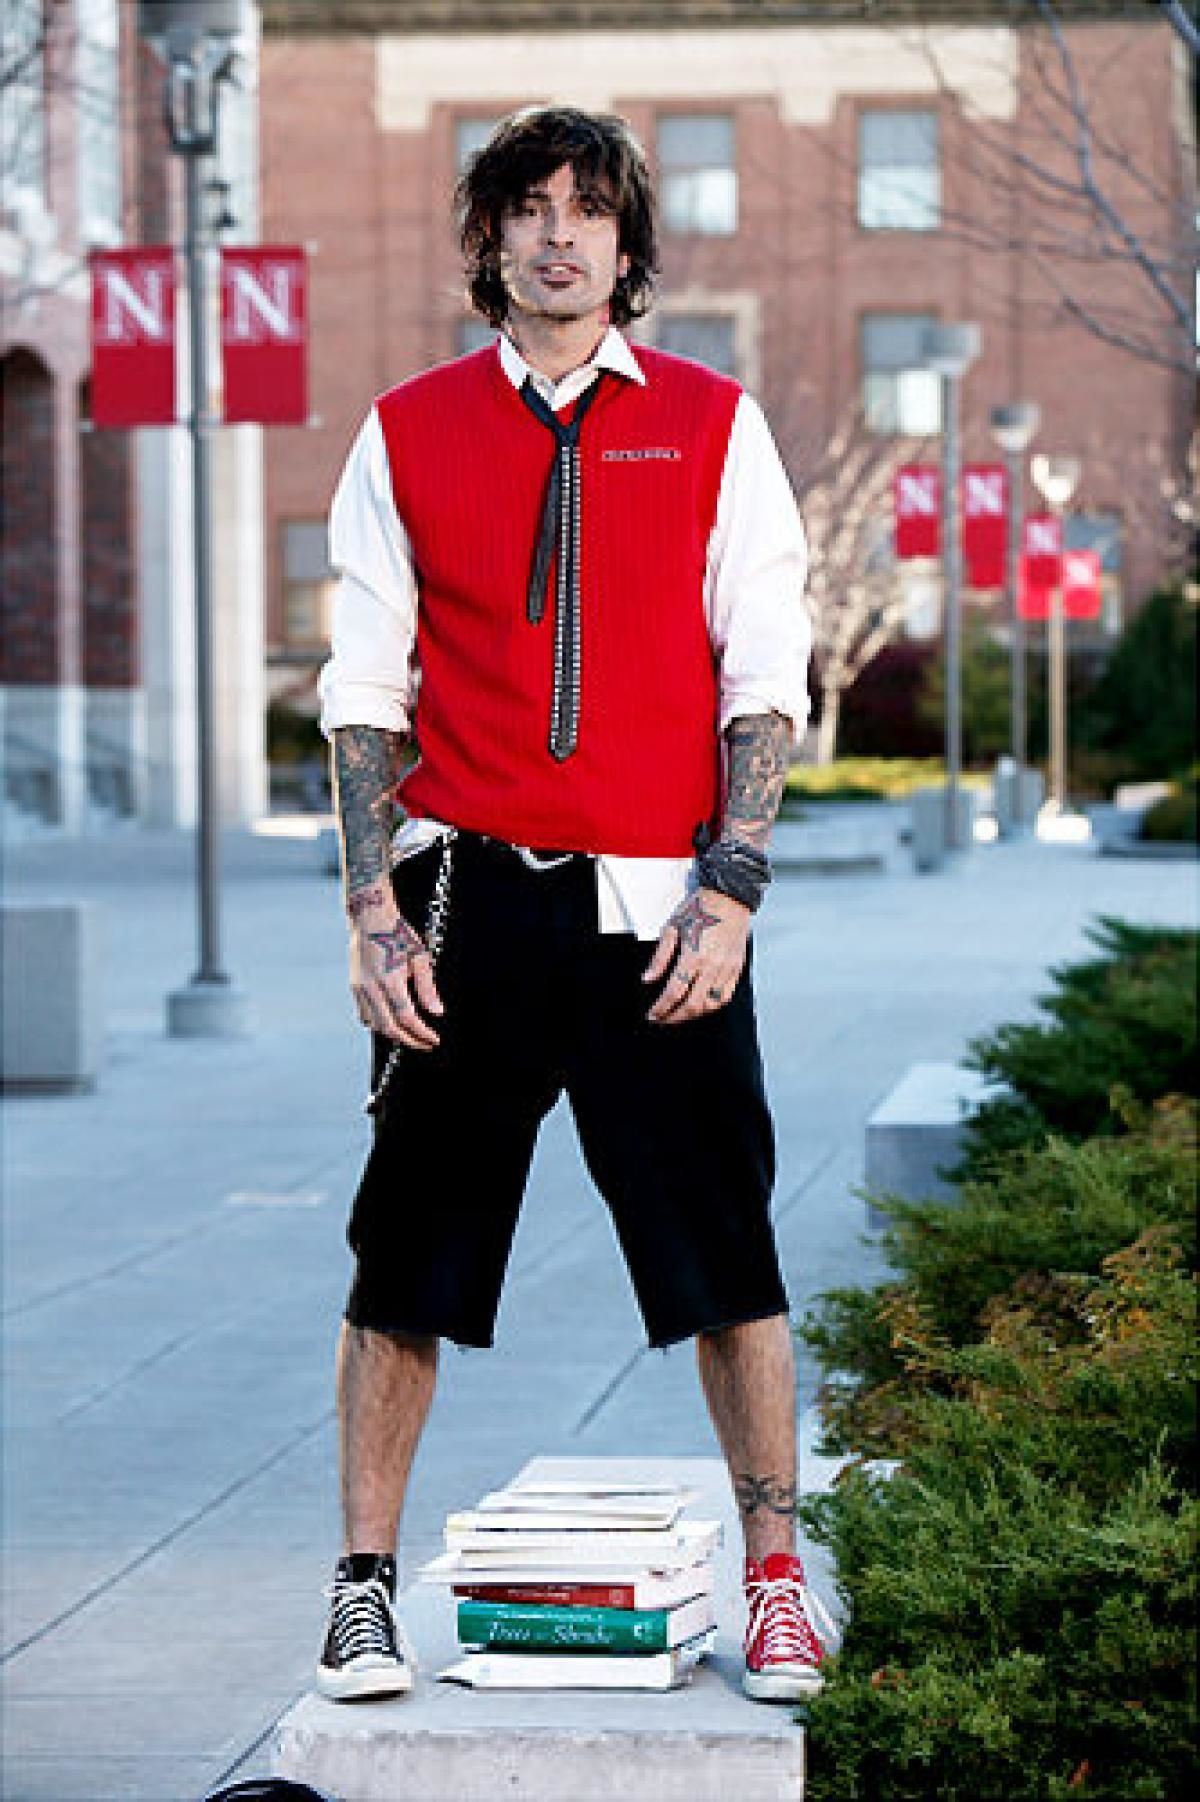 Tommy Lee Goes to College